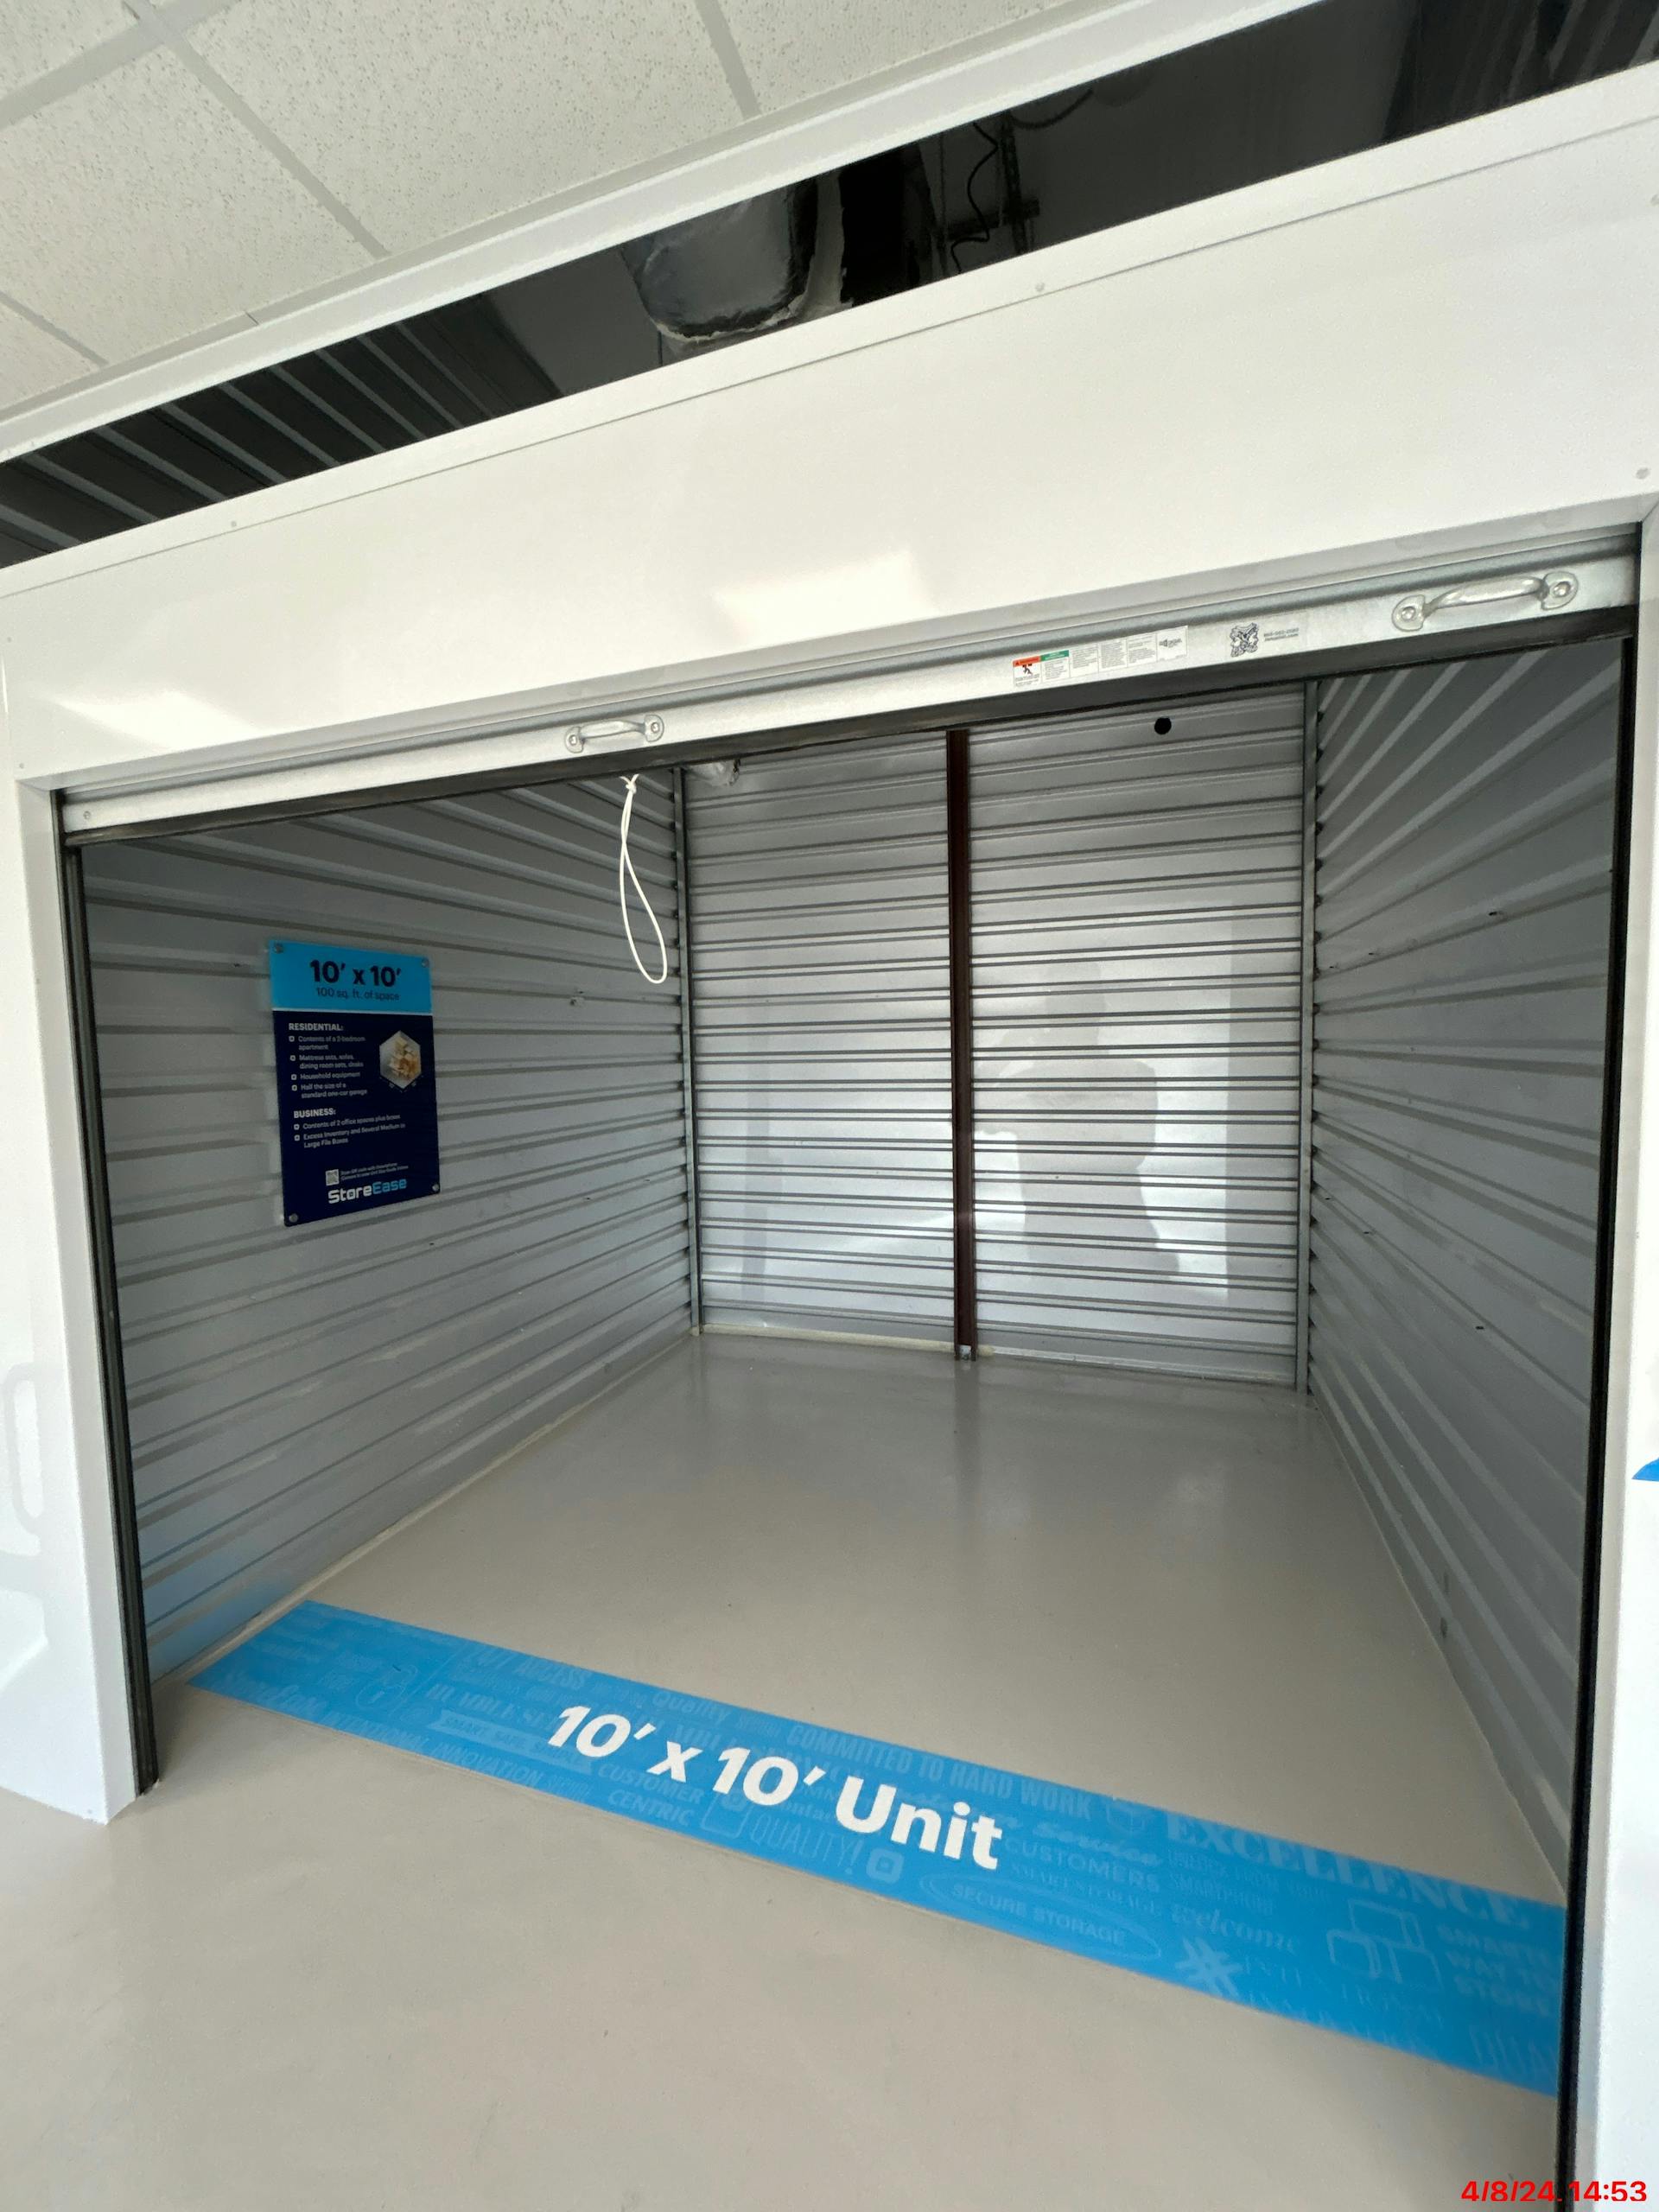 10x10 storage space example for customers